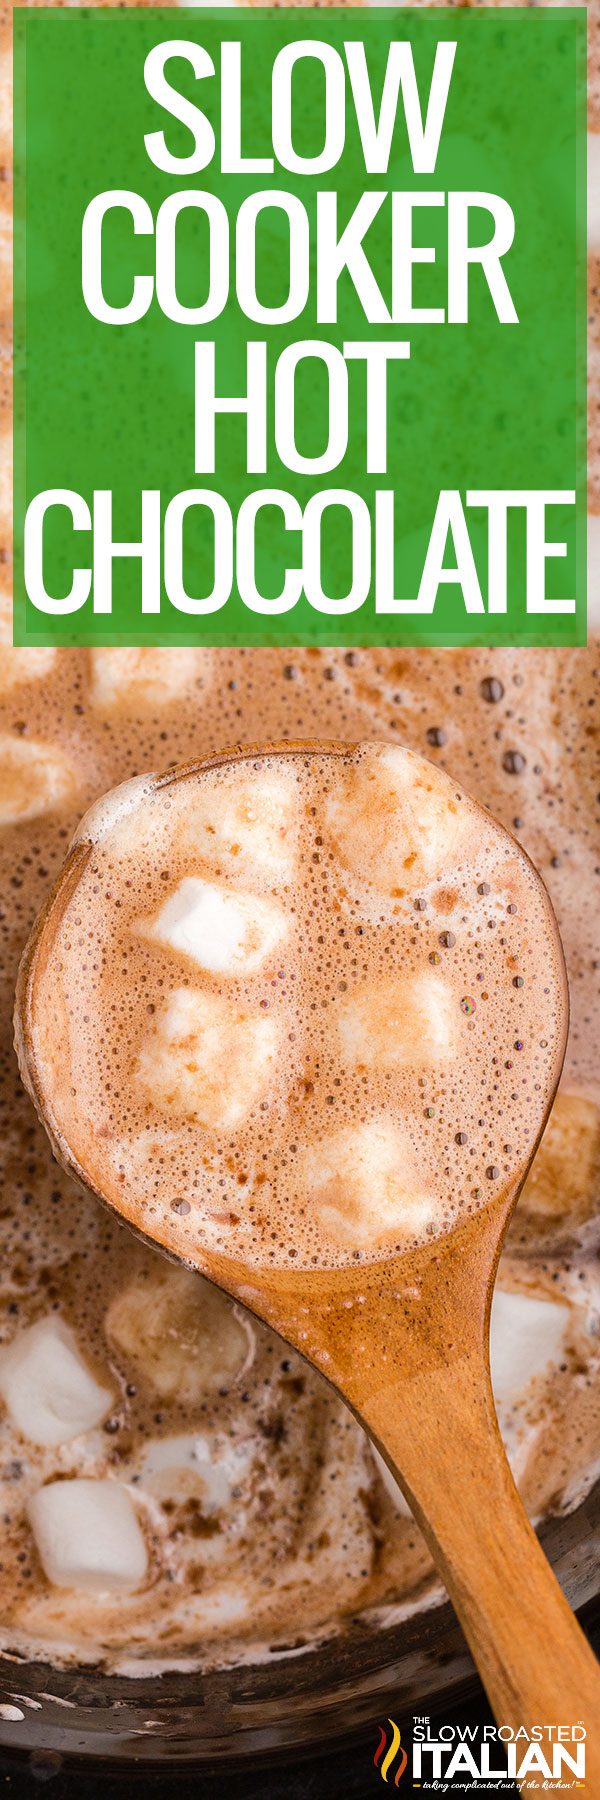 titled collage for slow cooker hot chocolate recipe